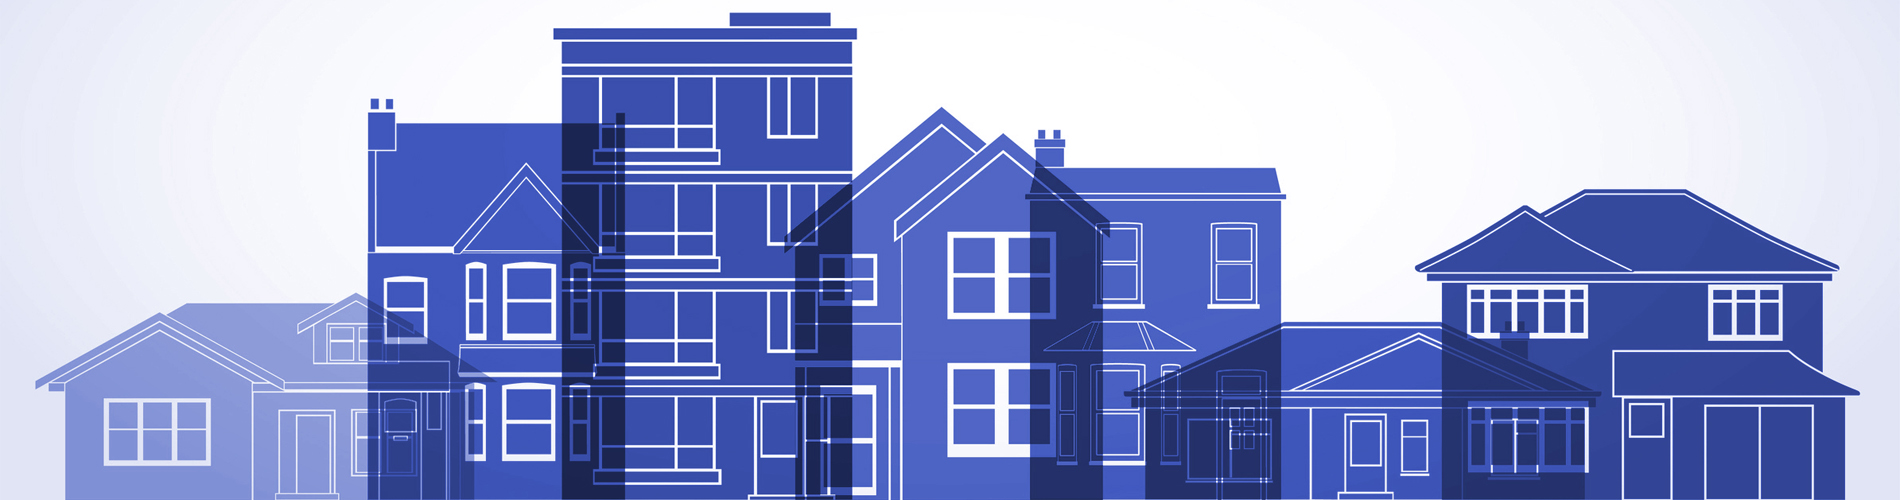 Leasing property houses - blue 1900x500